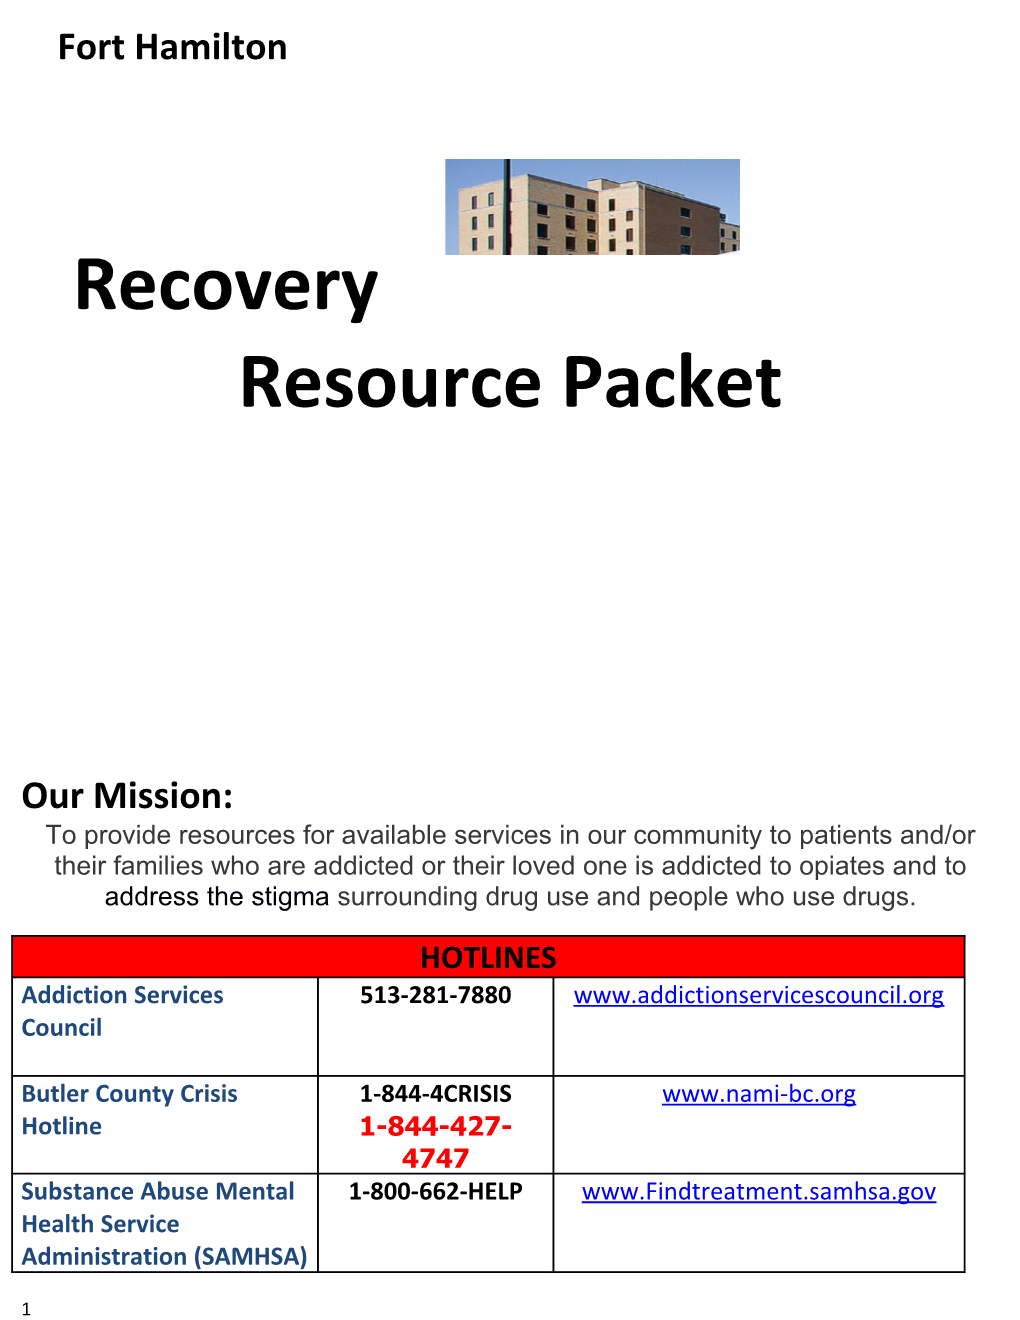 Recovery Resource Packet